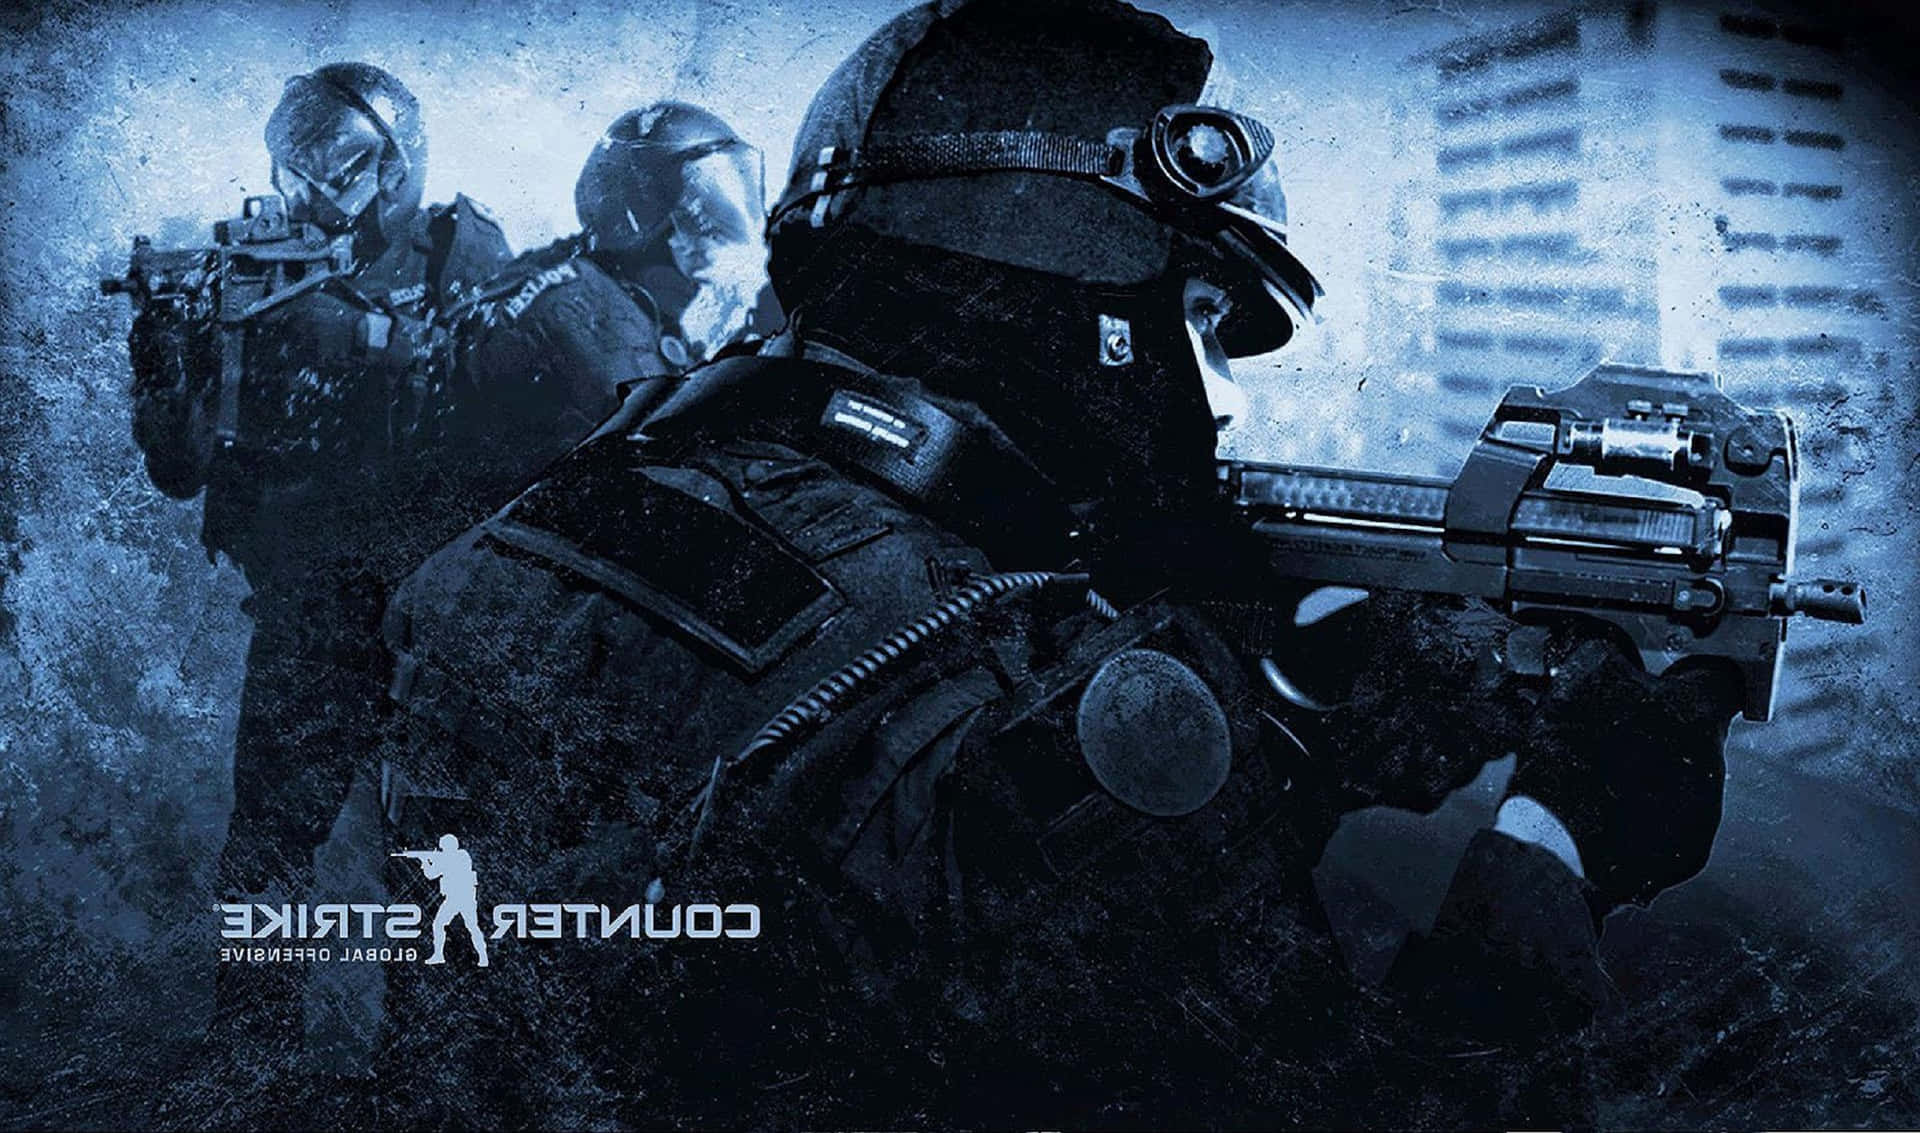 Compete in intense gunplay on Counter-Strike Global Offensive